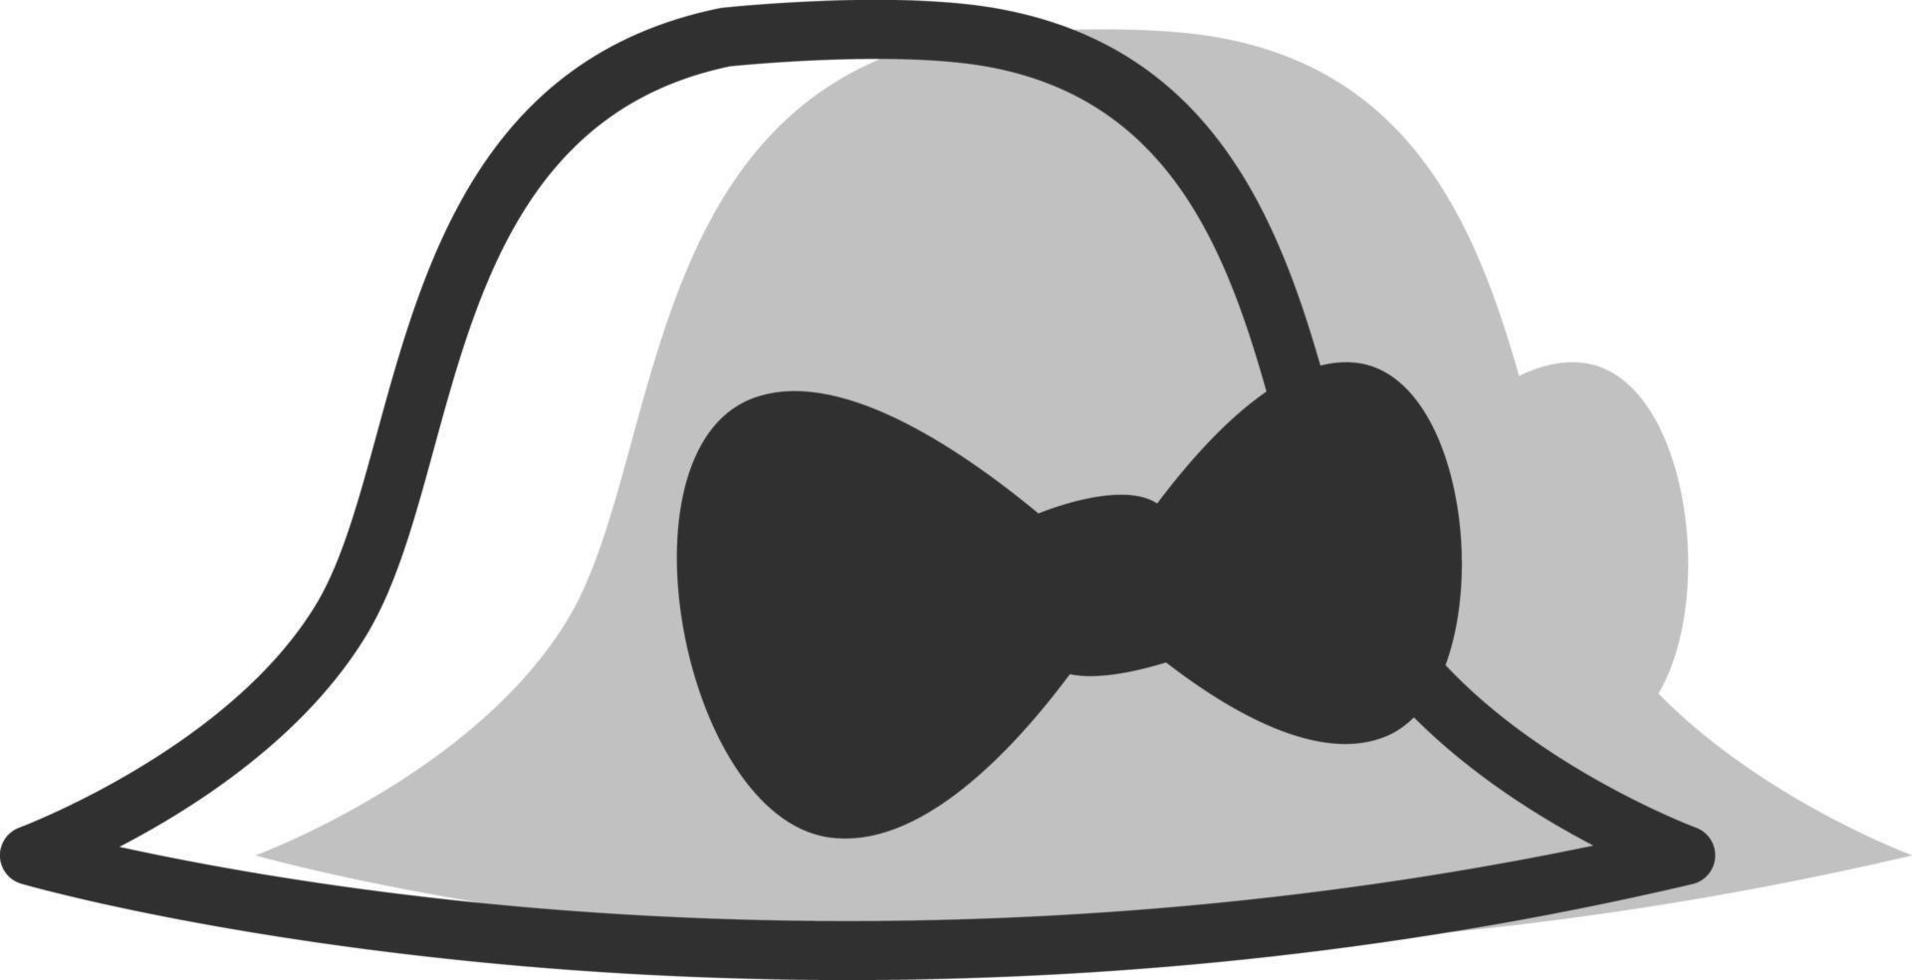 Grey hat with a bow, illustration, vector on white background.